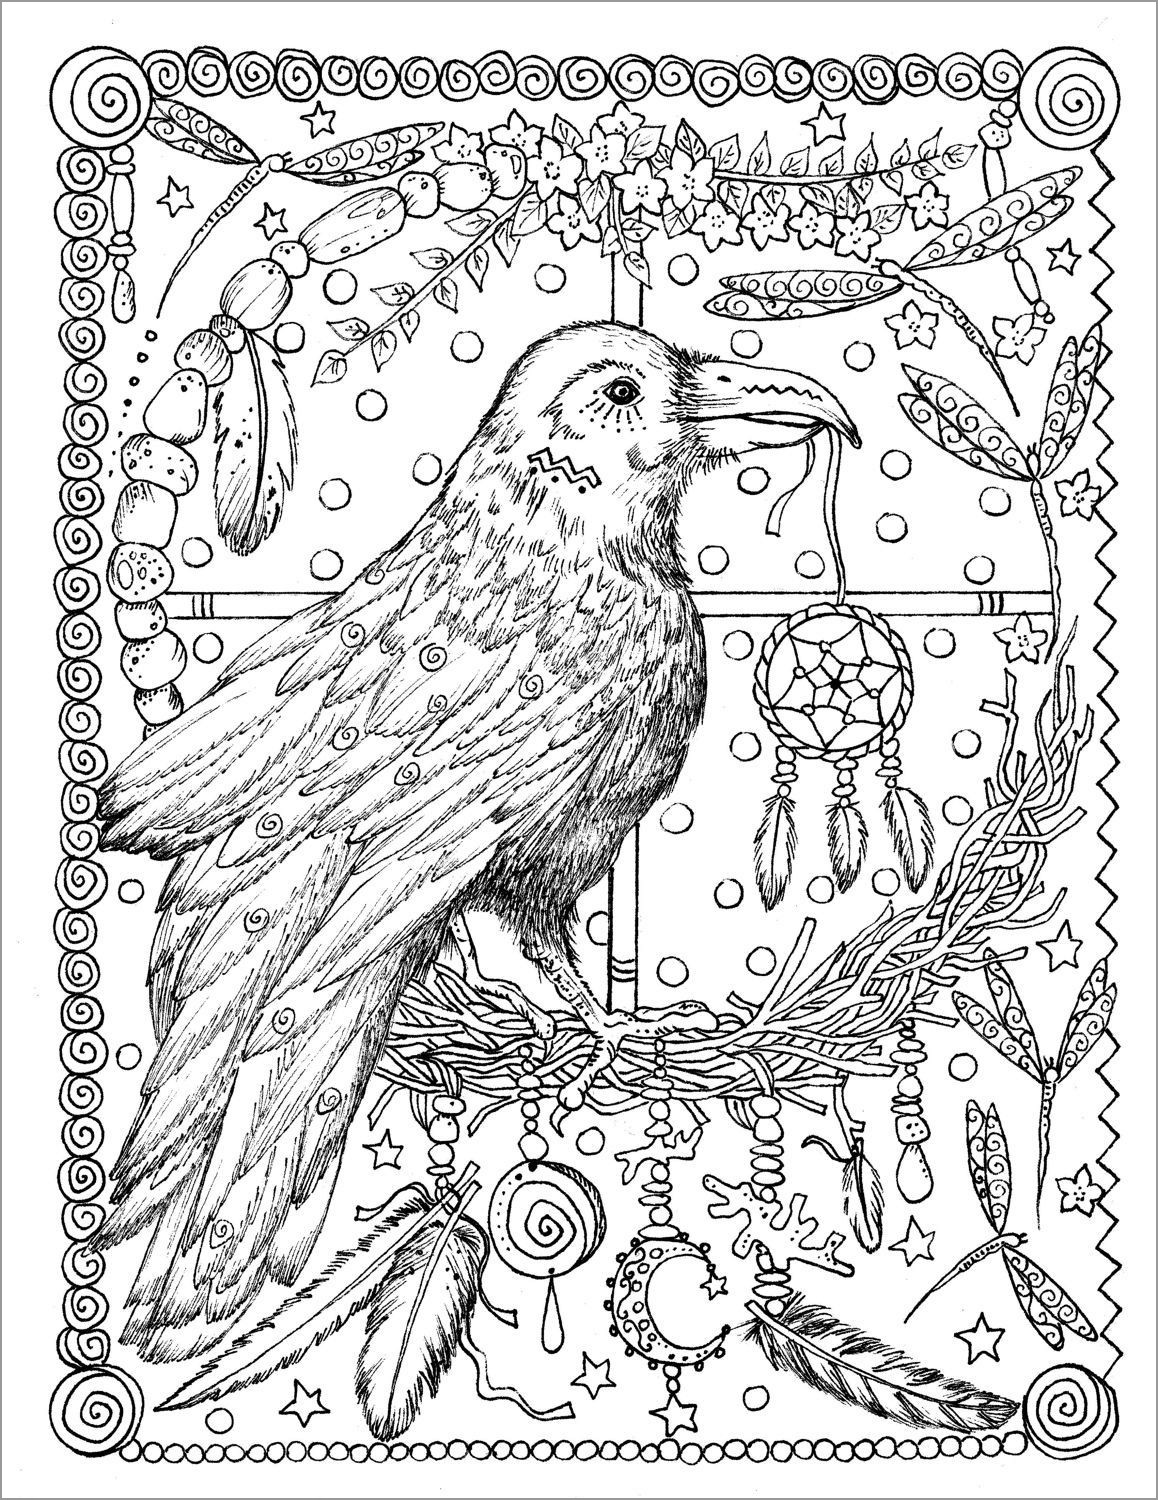 Raven Coloring Page for Adult